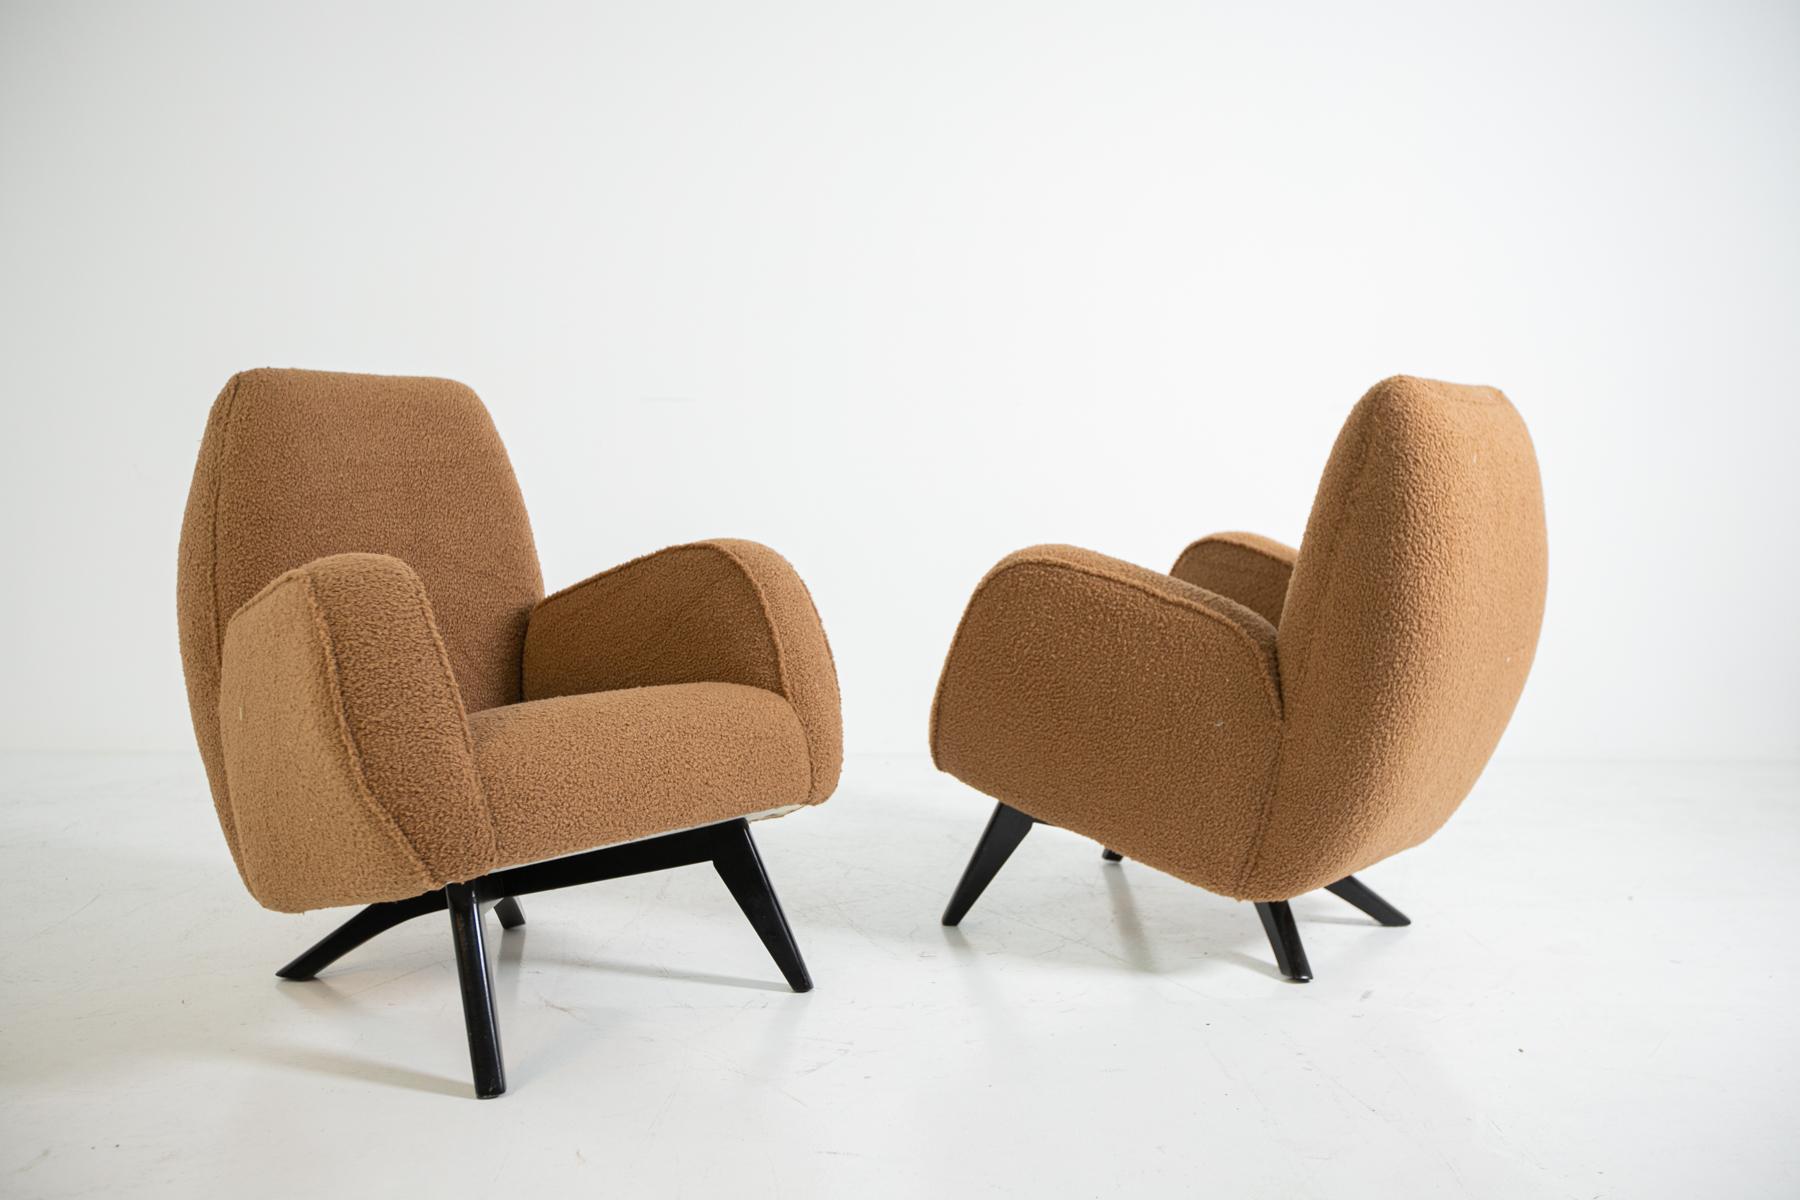 Magnificent pair of Melchiorre Bega armchairs from the 1950s. Melchiorre Bega armchairs have a very soft and comfortable line. Their rounded line completely envelops its guest. Giving strength to its enveloping line is its brown bouclè fabric